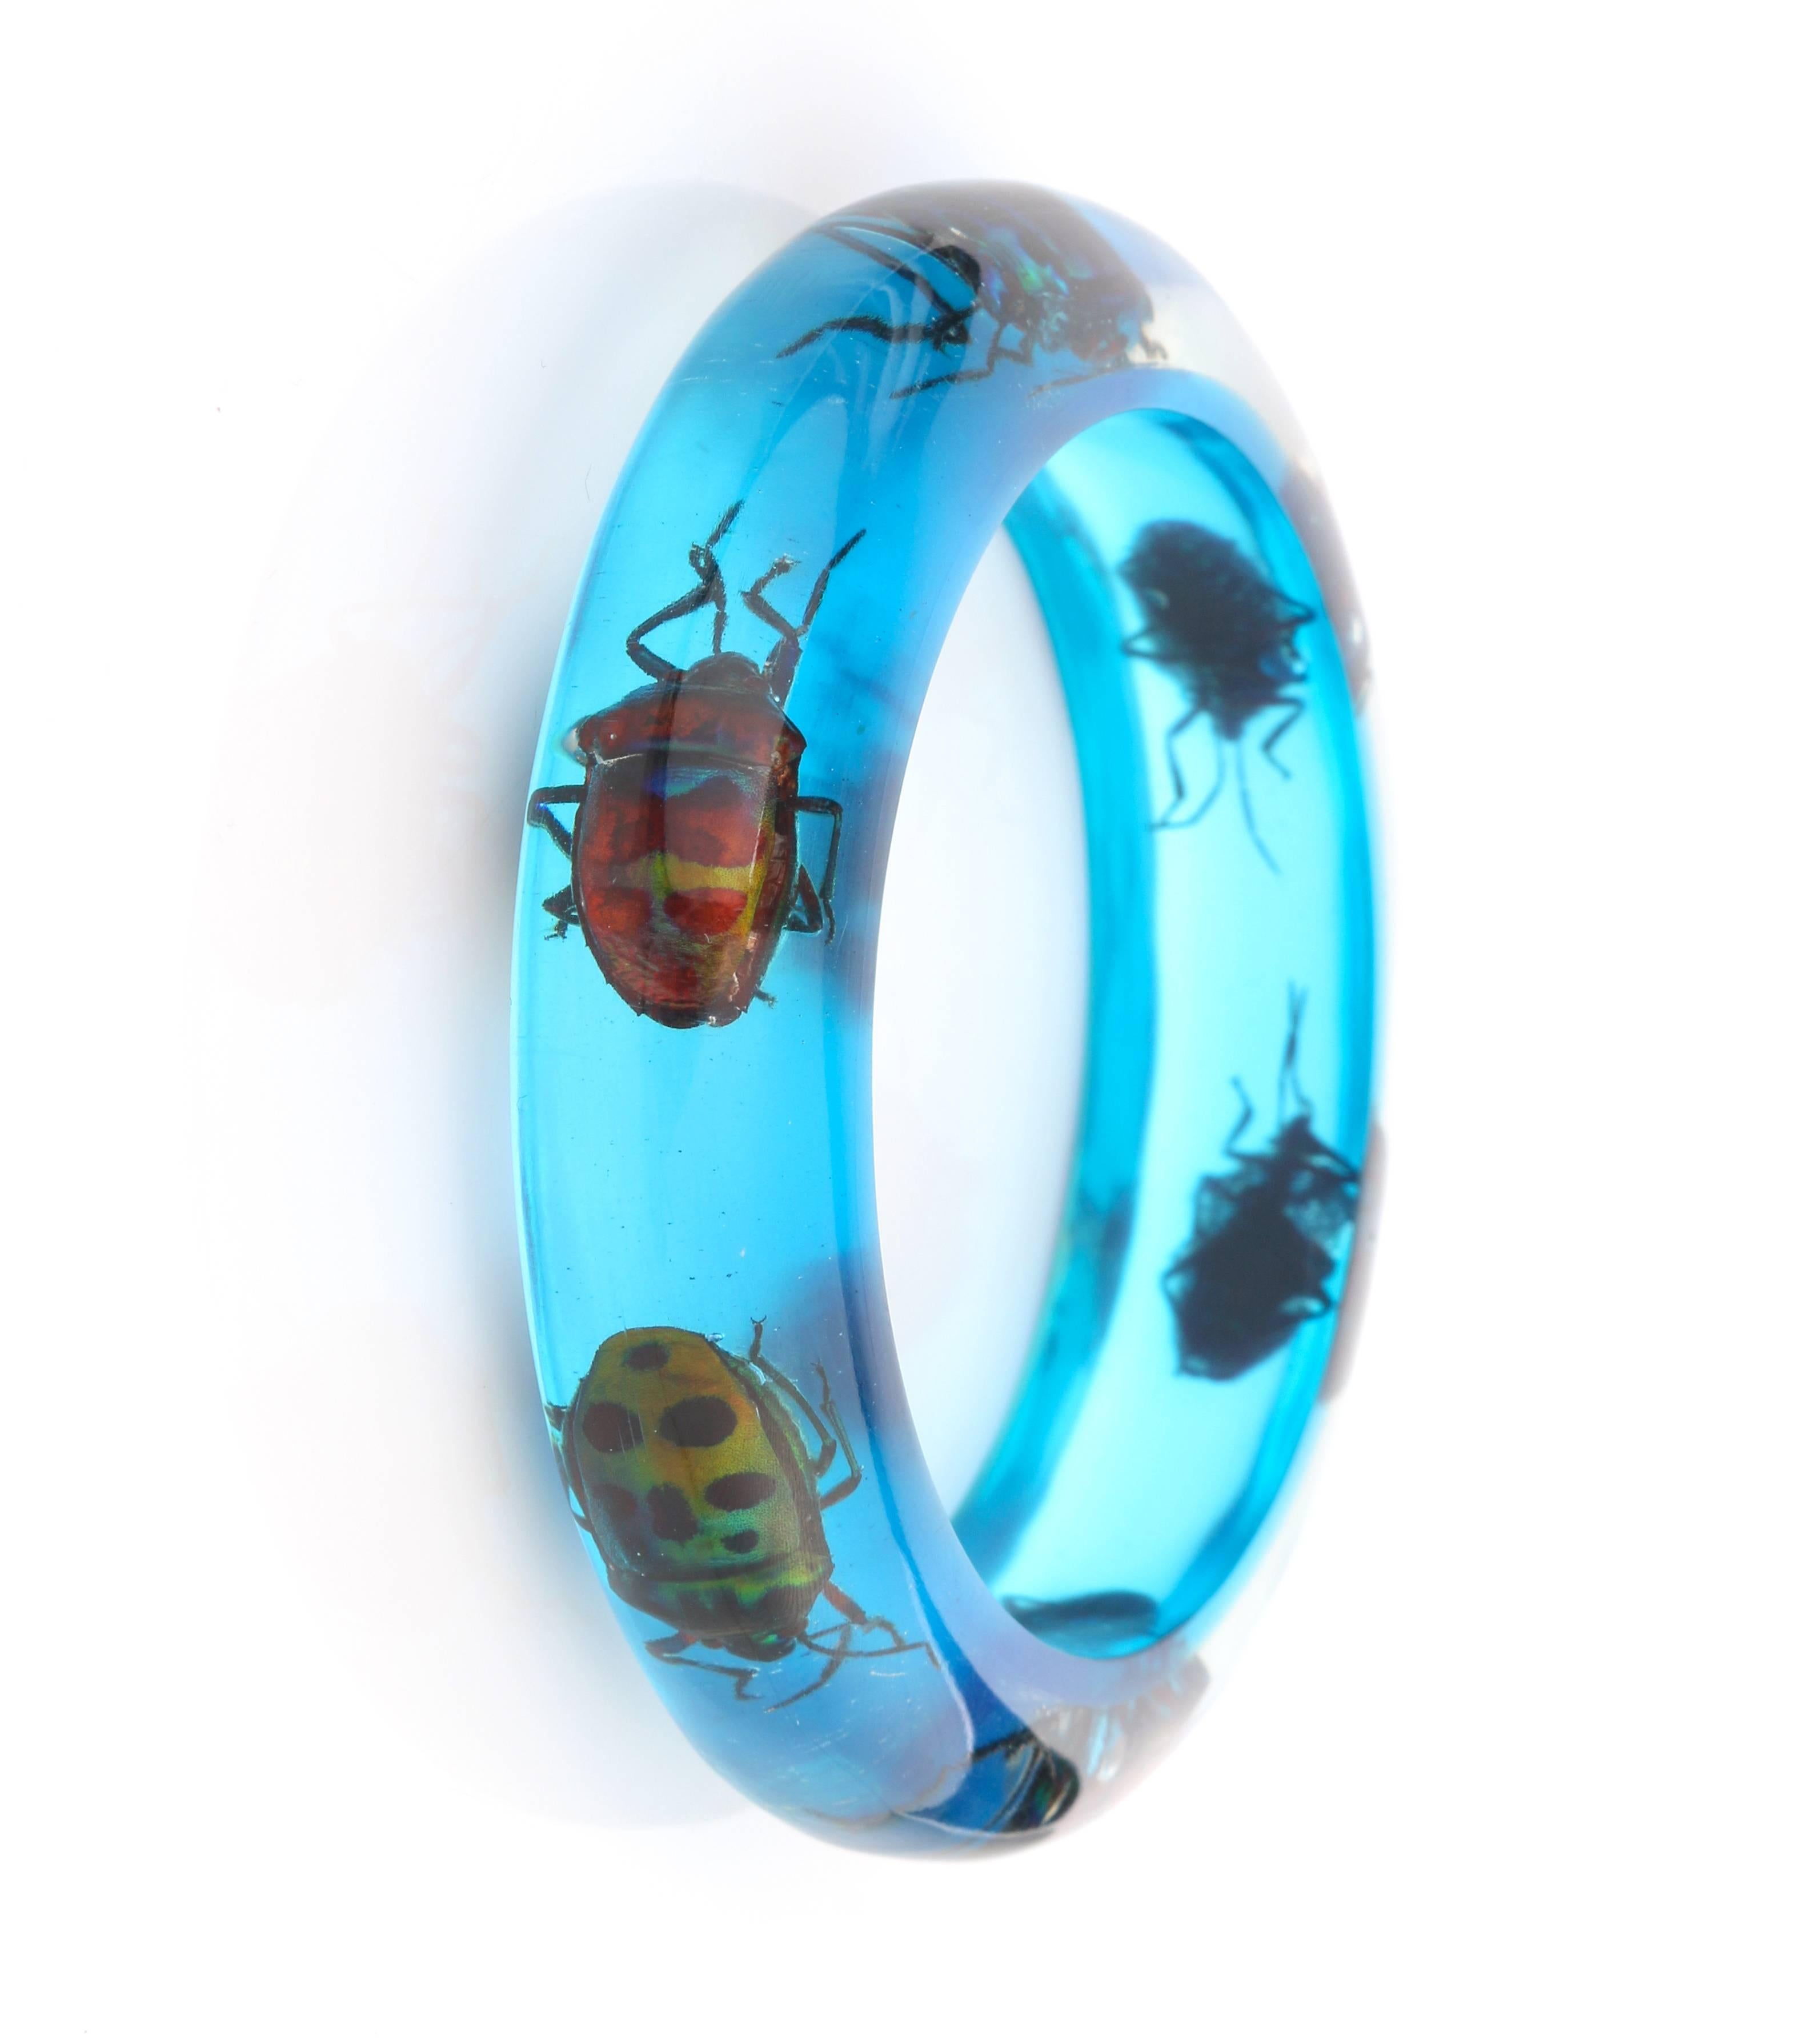 Vintage mid-century blue translucent lucite iridescent beetle embedded bangle bracelet. Six multicolored iridescent exotic beetles embedded in translucent blue lucite. Circular shape. Slip-on style. Marked 